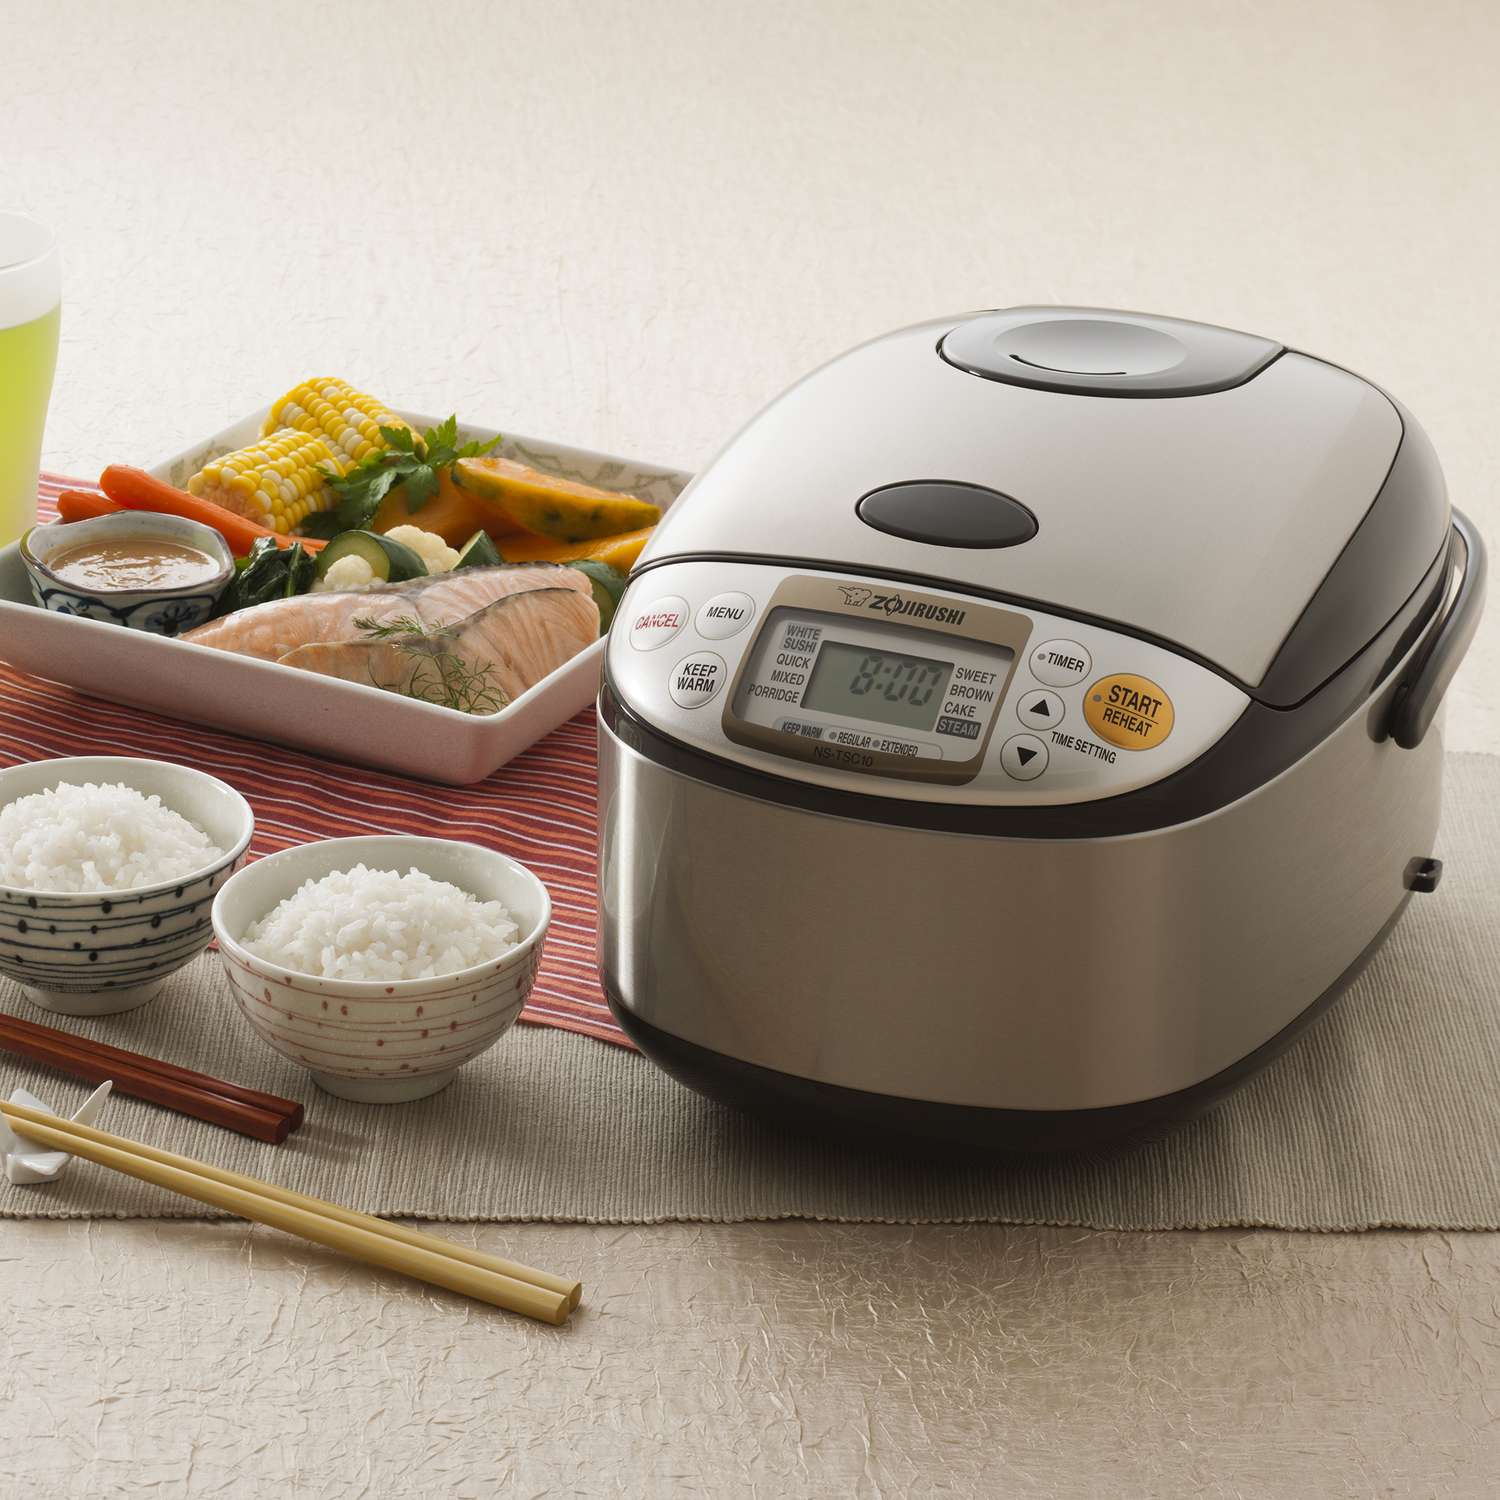 Zojirushi Micom 5.5-Cup Rice Cooker, Cool White